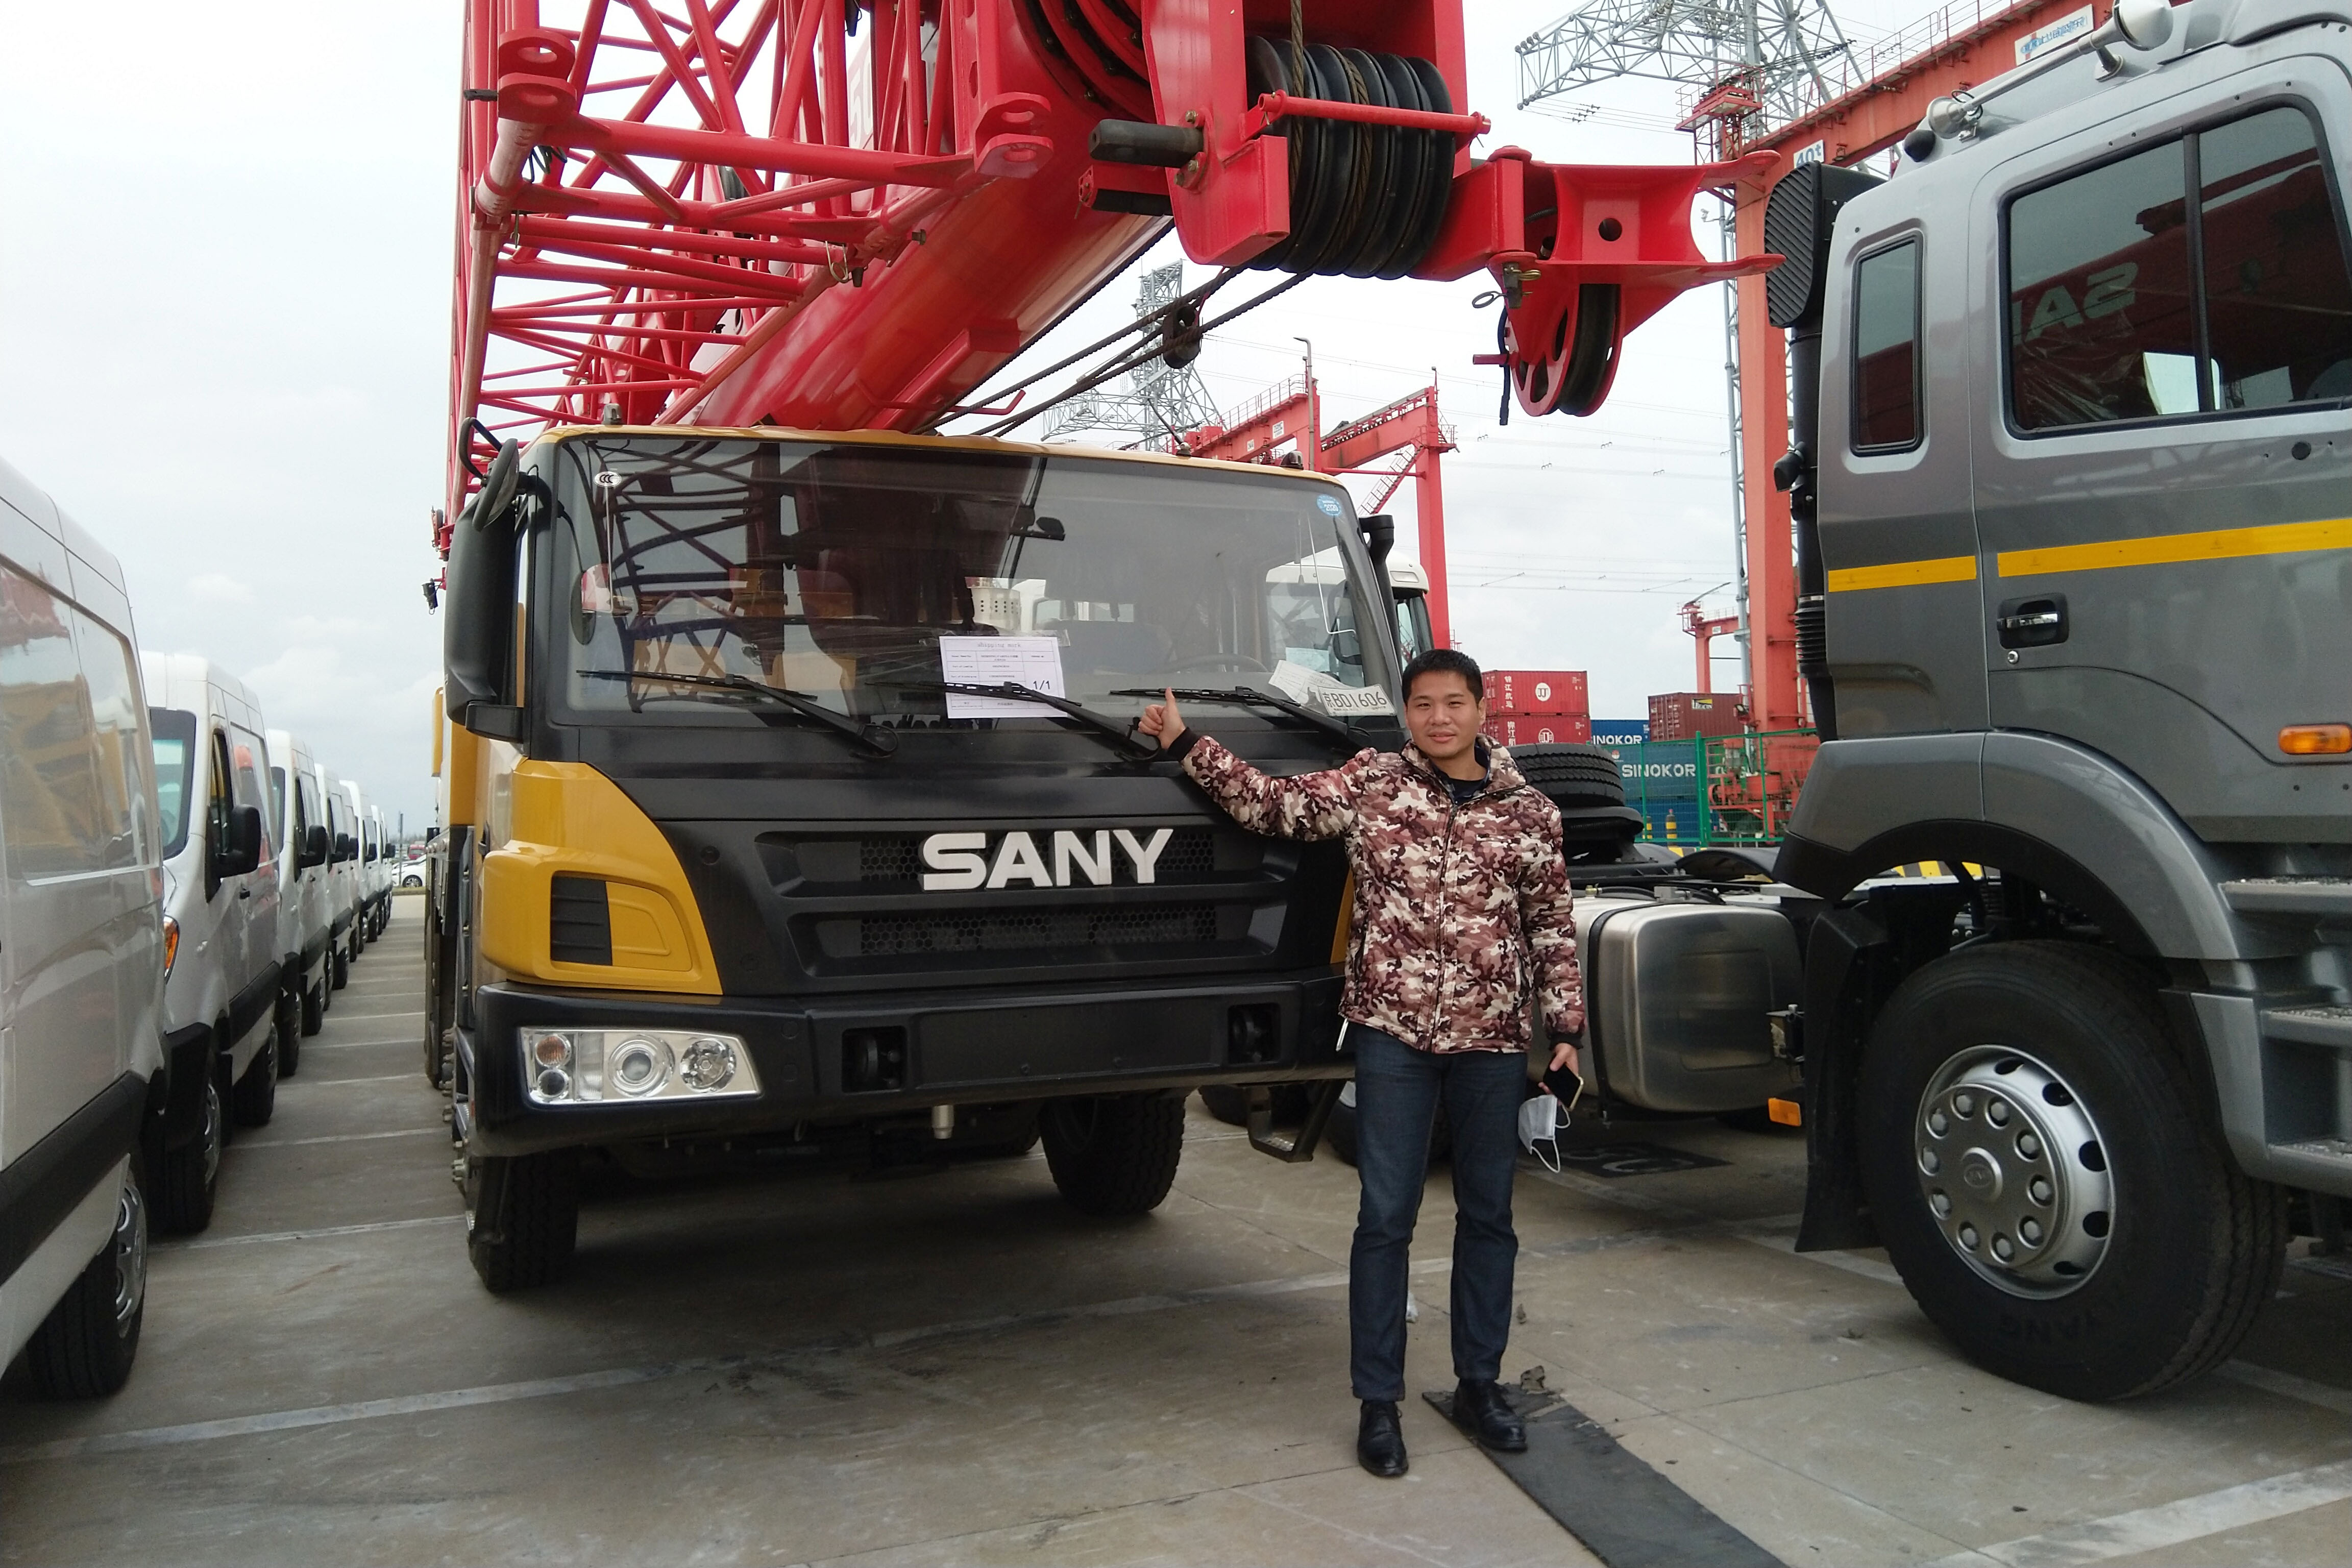 On March 31, 2020, the mobile cranes truck sold to Ukraine arrived at the port.